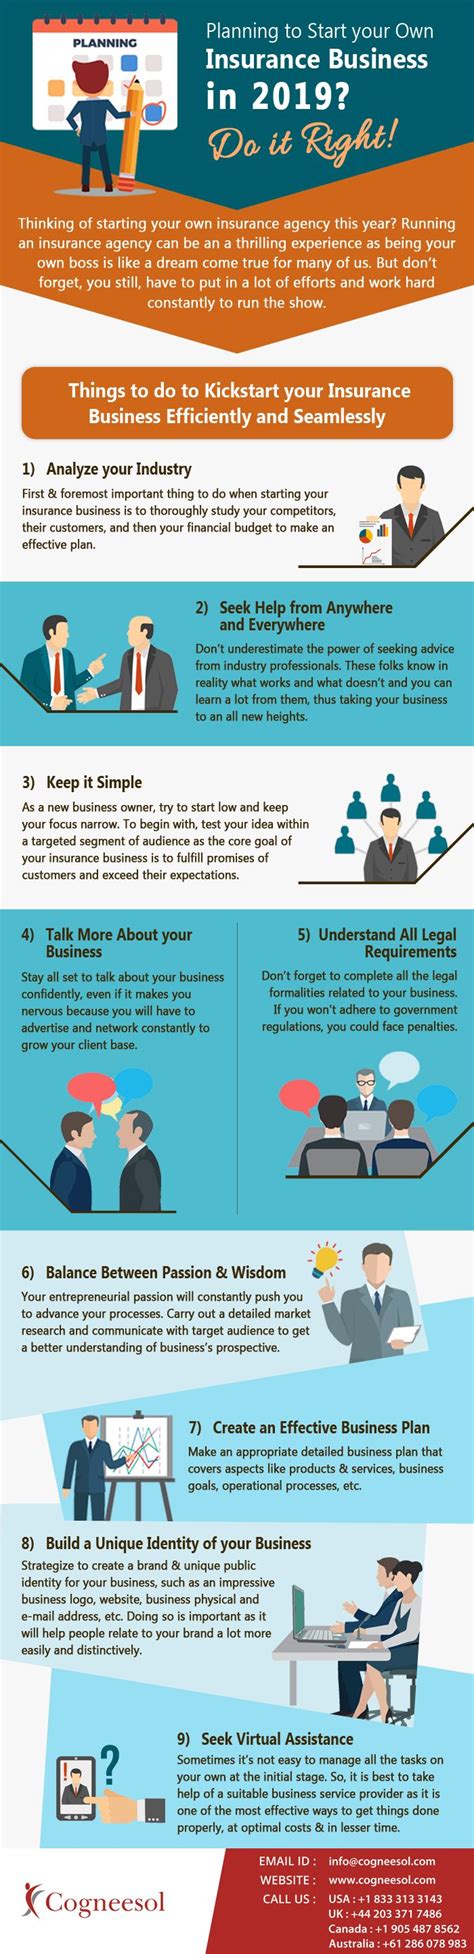 Check spelling or type a new query. Planning to Start your Own Insurance Business in 2019? Do it Right! - Infographic | How to plan ...